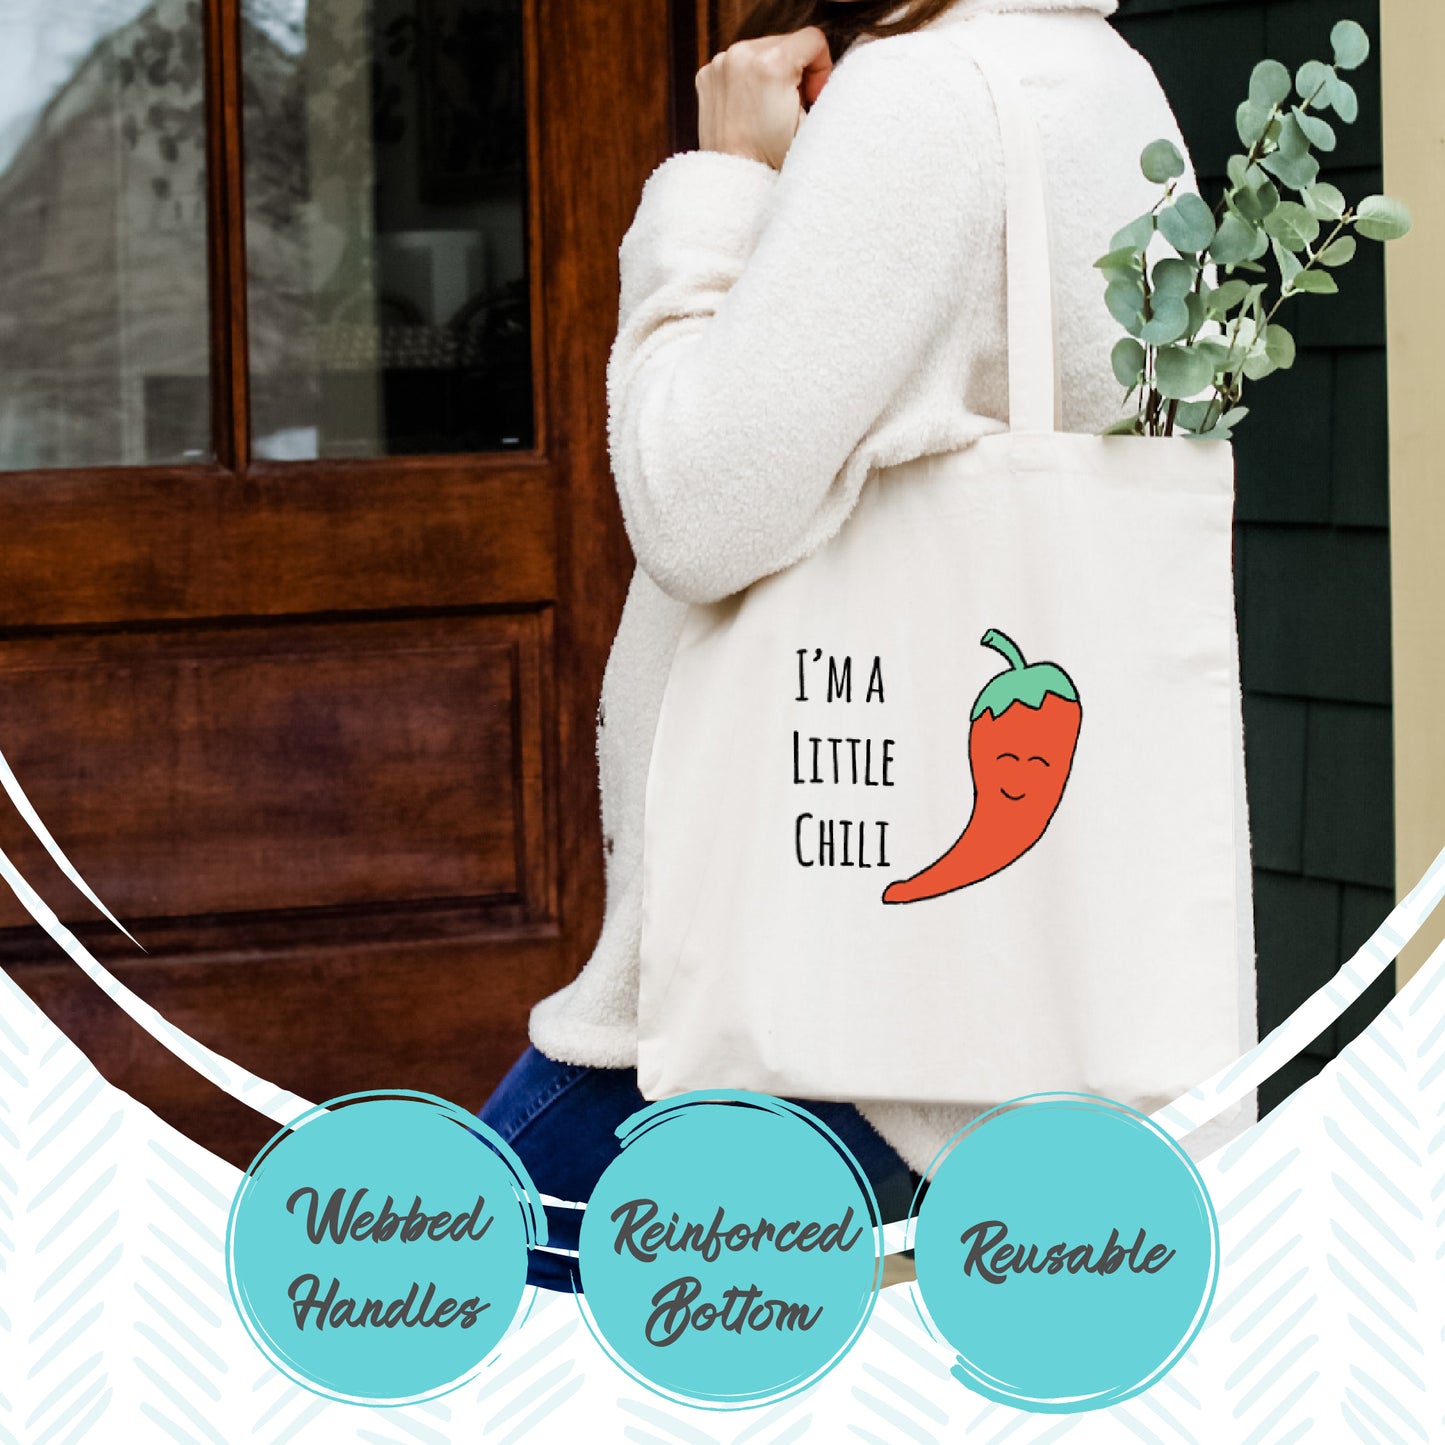 You Look Grate Today - Full Color Tote - MoonlightMakers